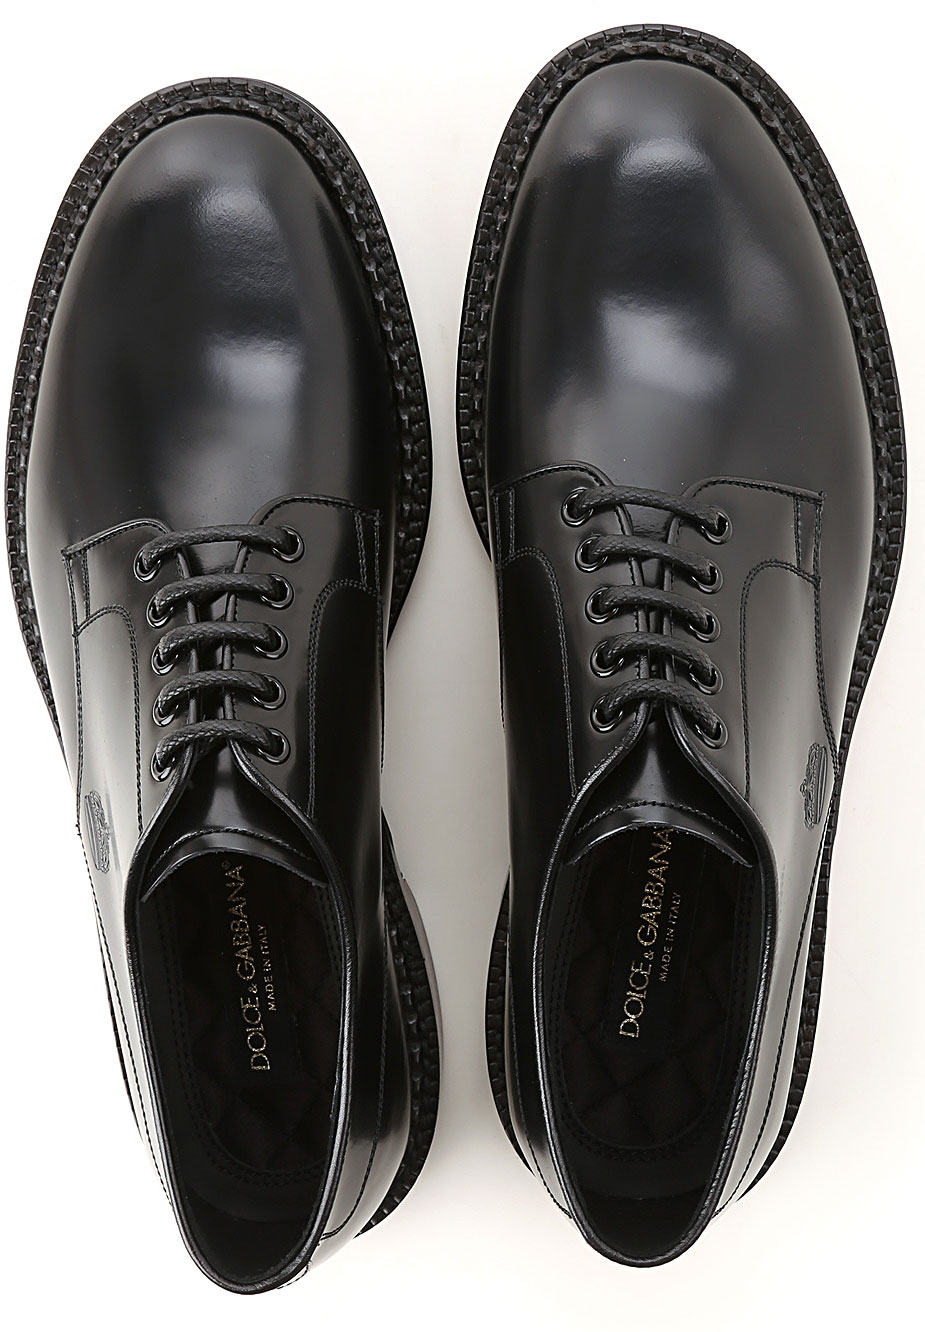 Mens Shoes Dolce & Gabbana, Style code: a10471-aa384-80999